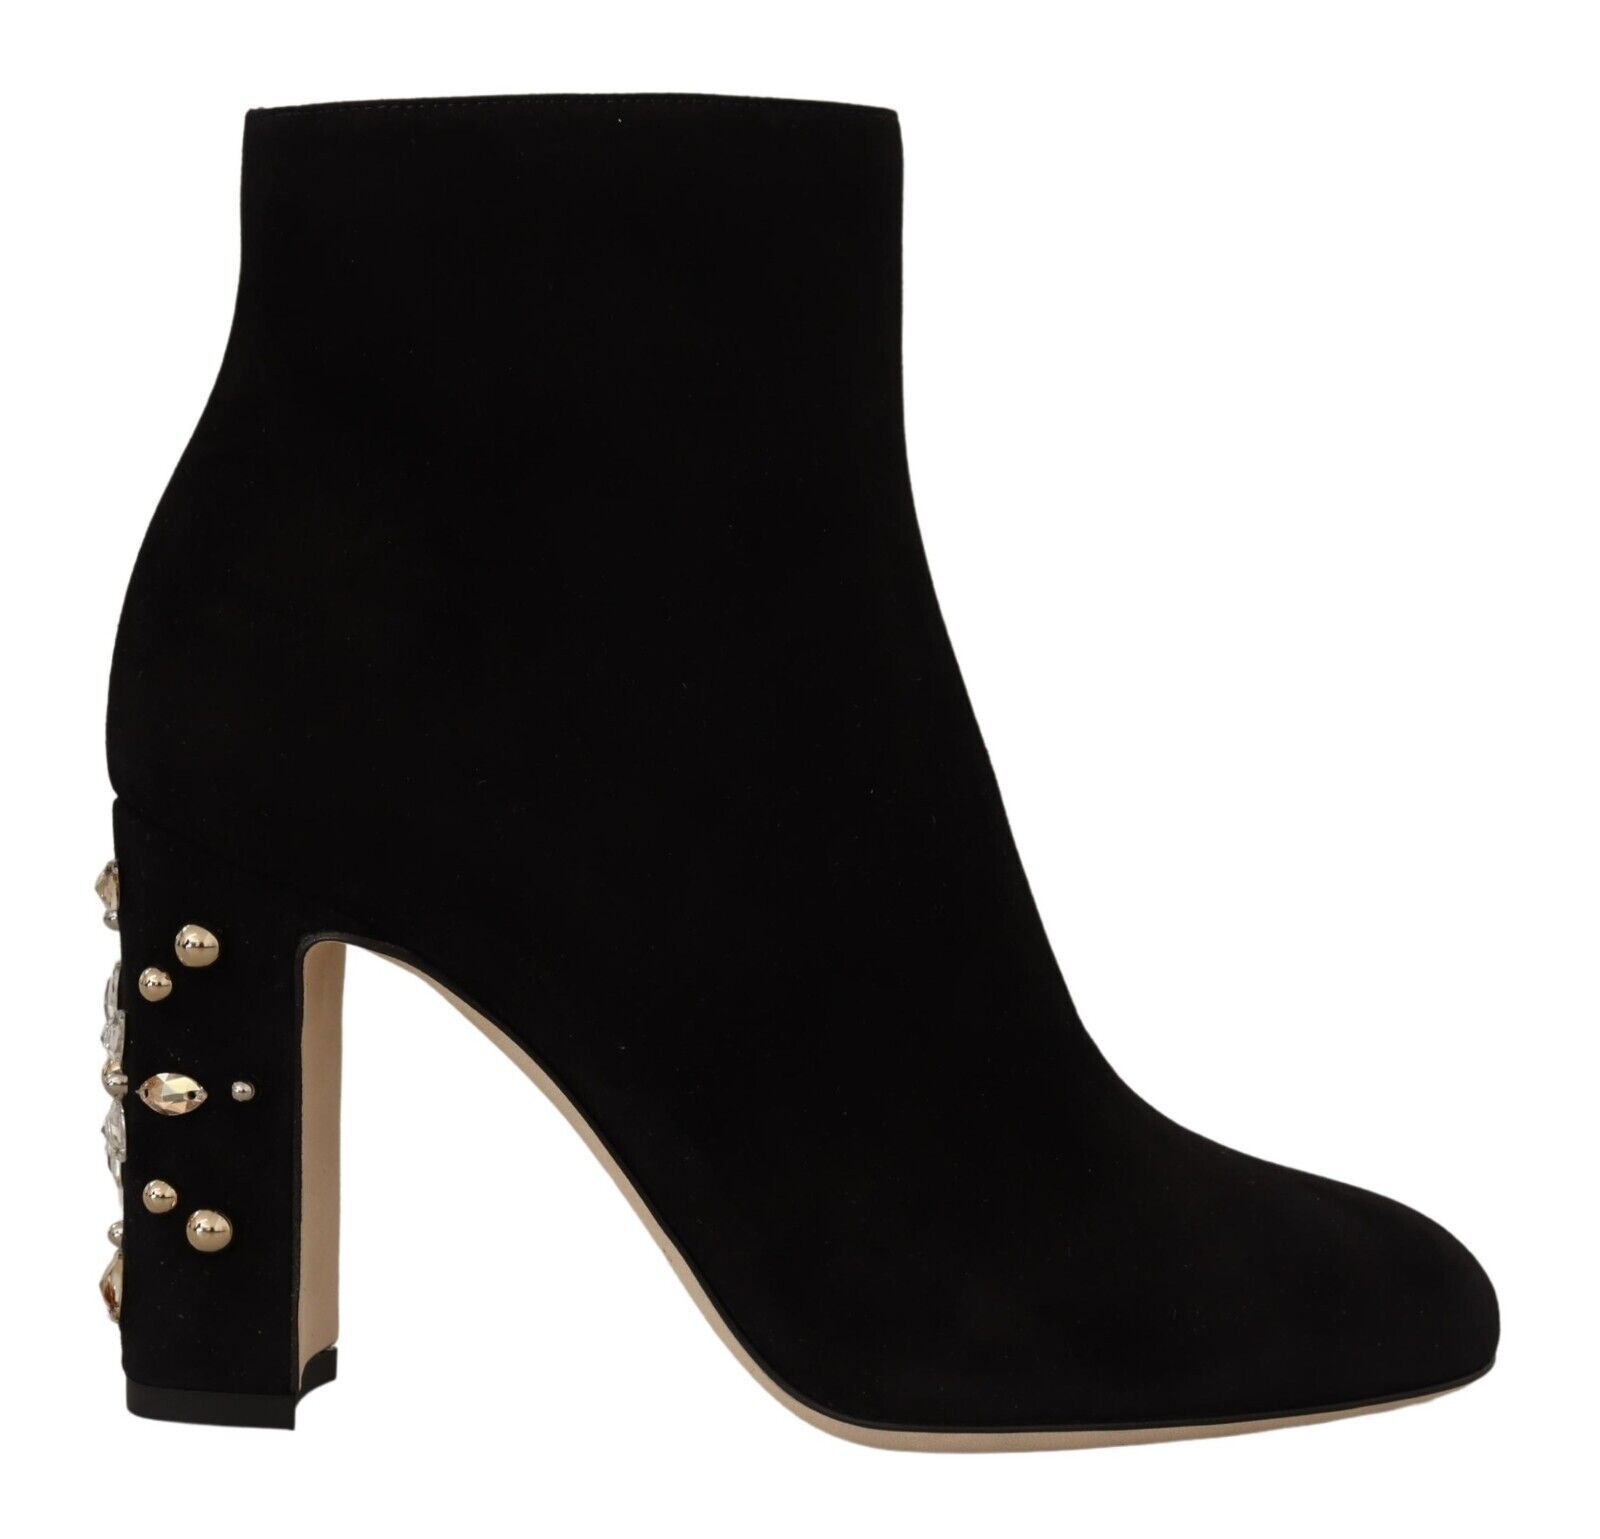 Black Dolce & Gabbana Black Suede Leather Crystal Heels Boots Shoes